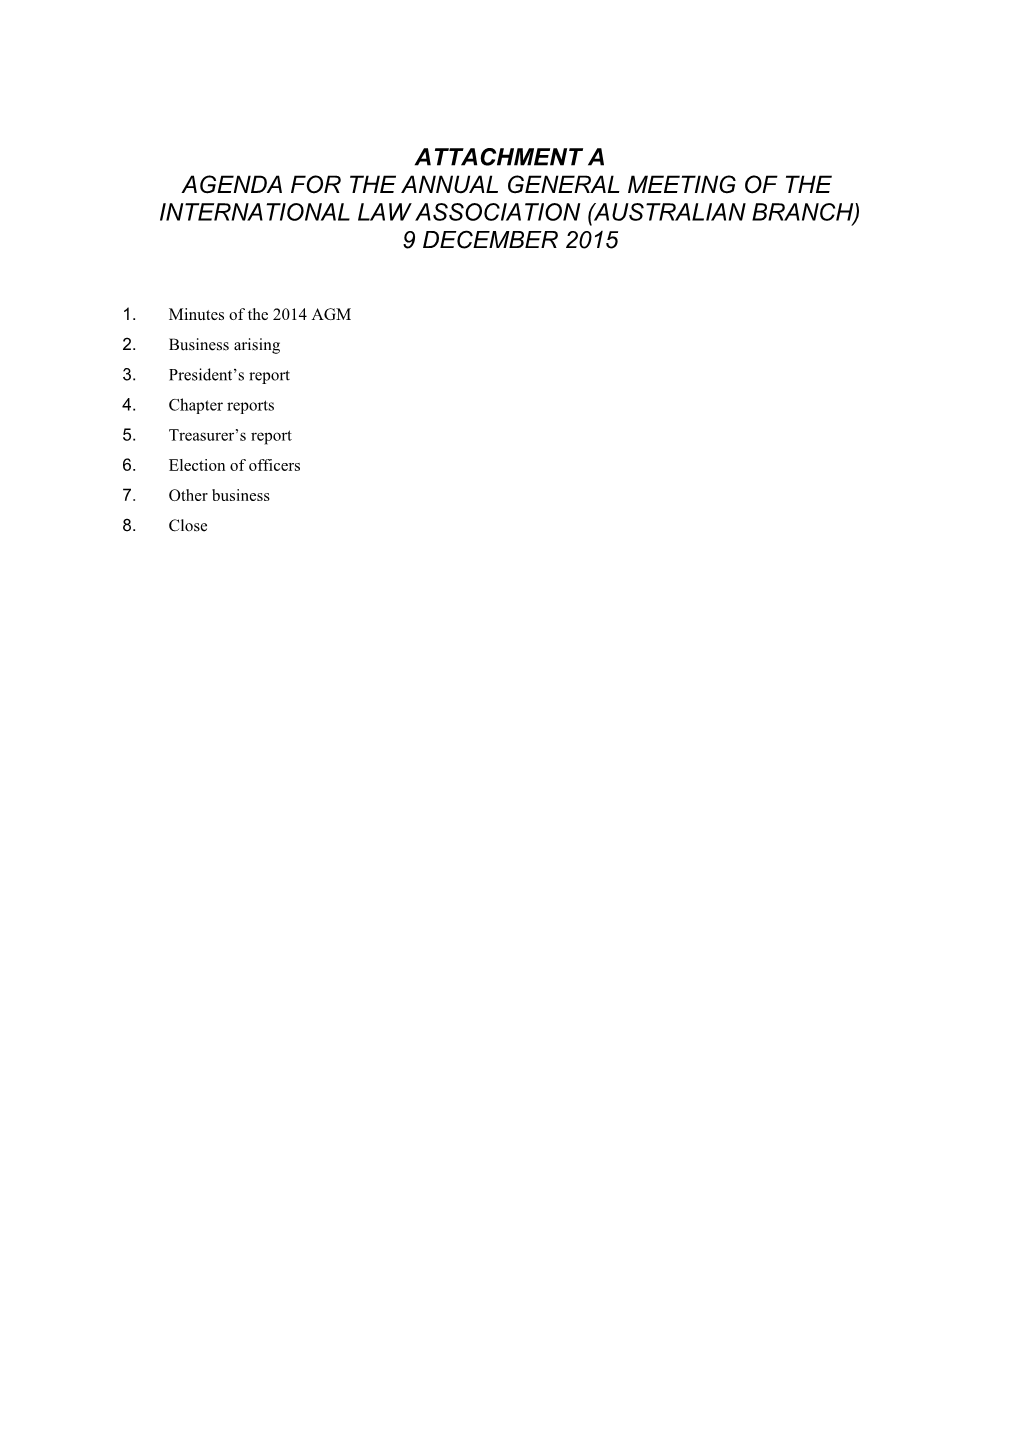 Attachmenta Agenda for the Annual General Meeting of the International Law Association